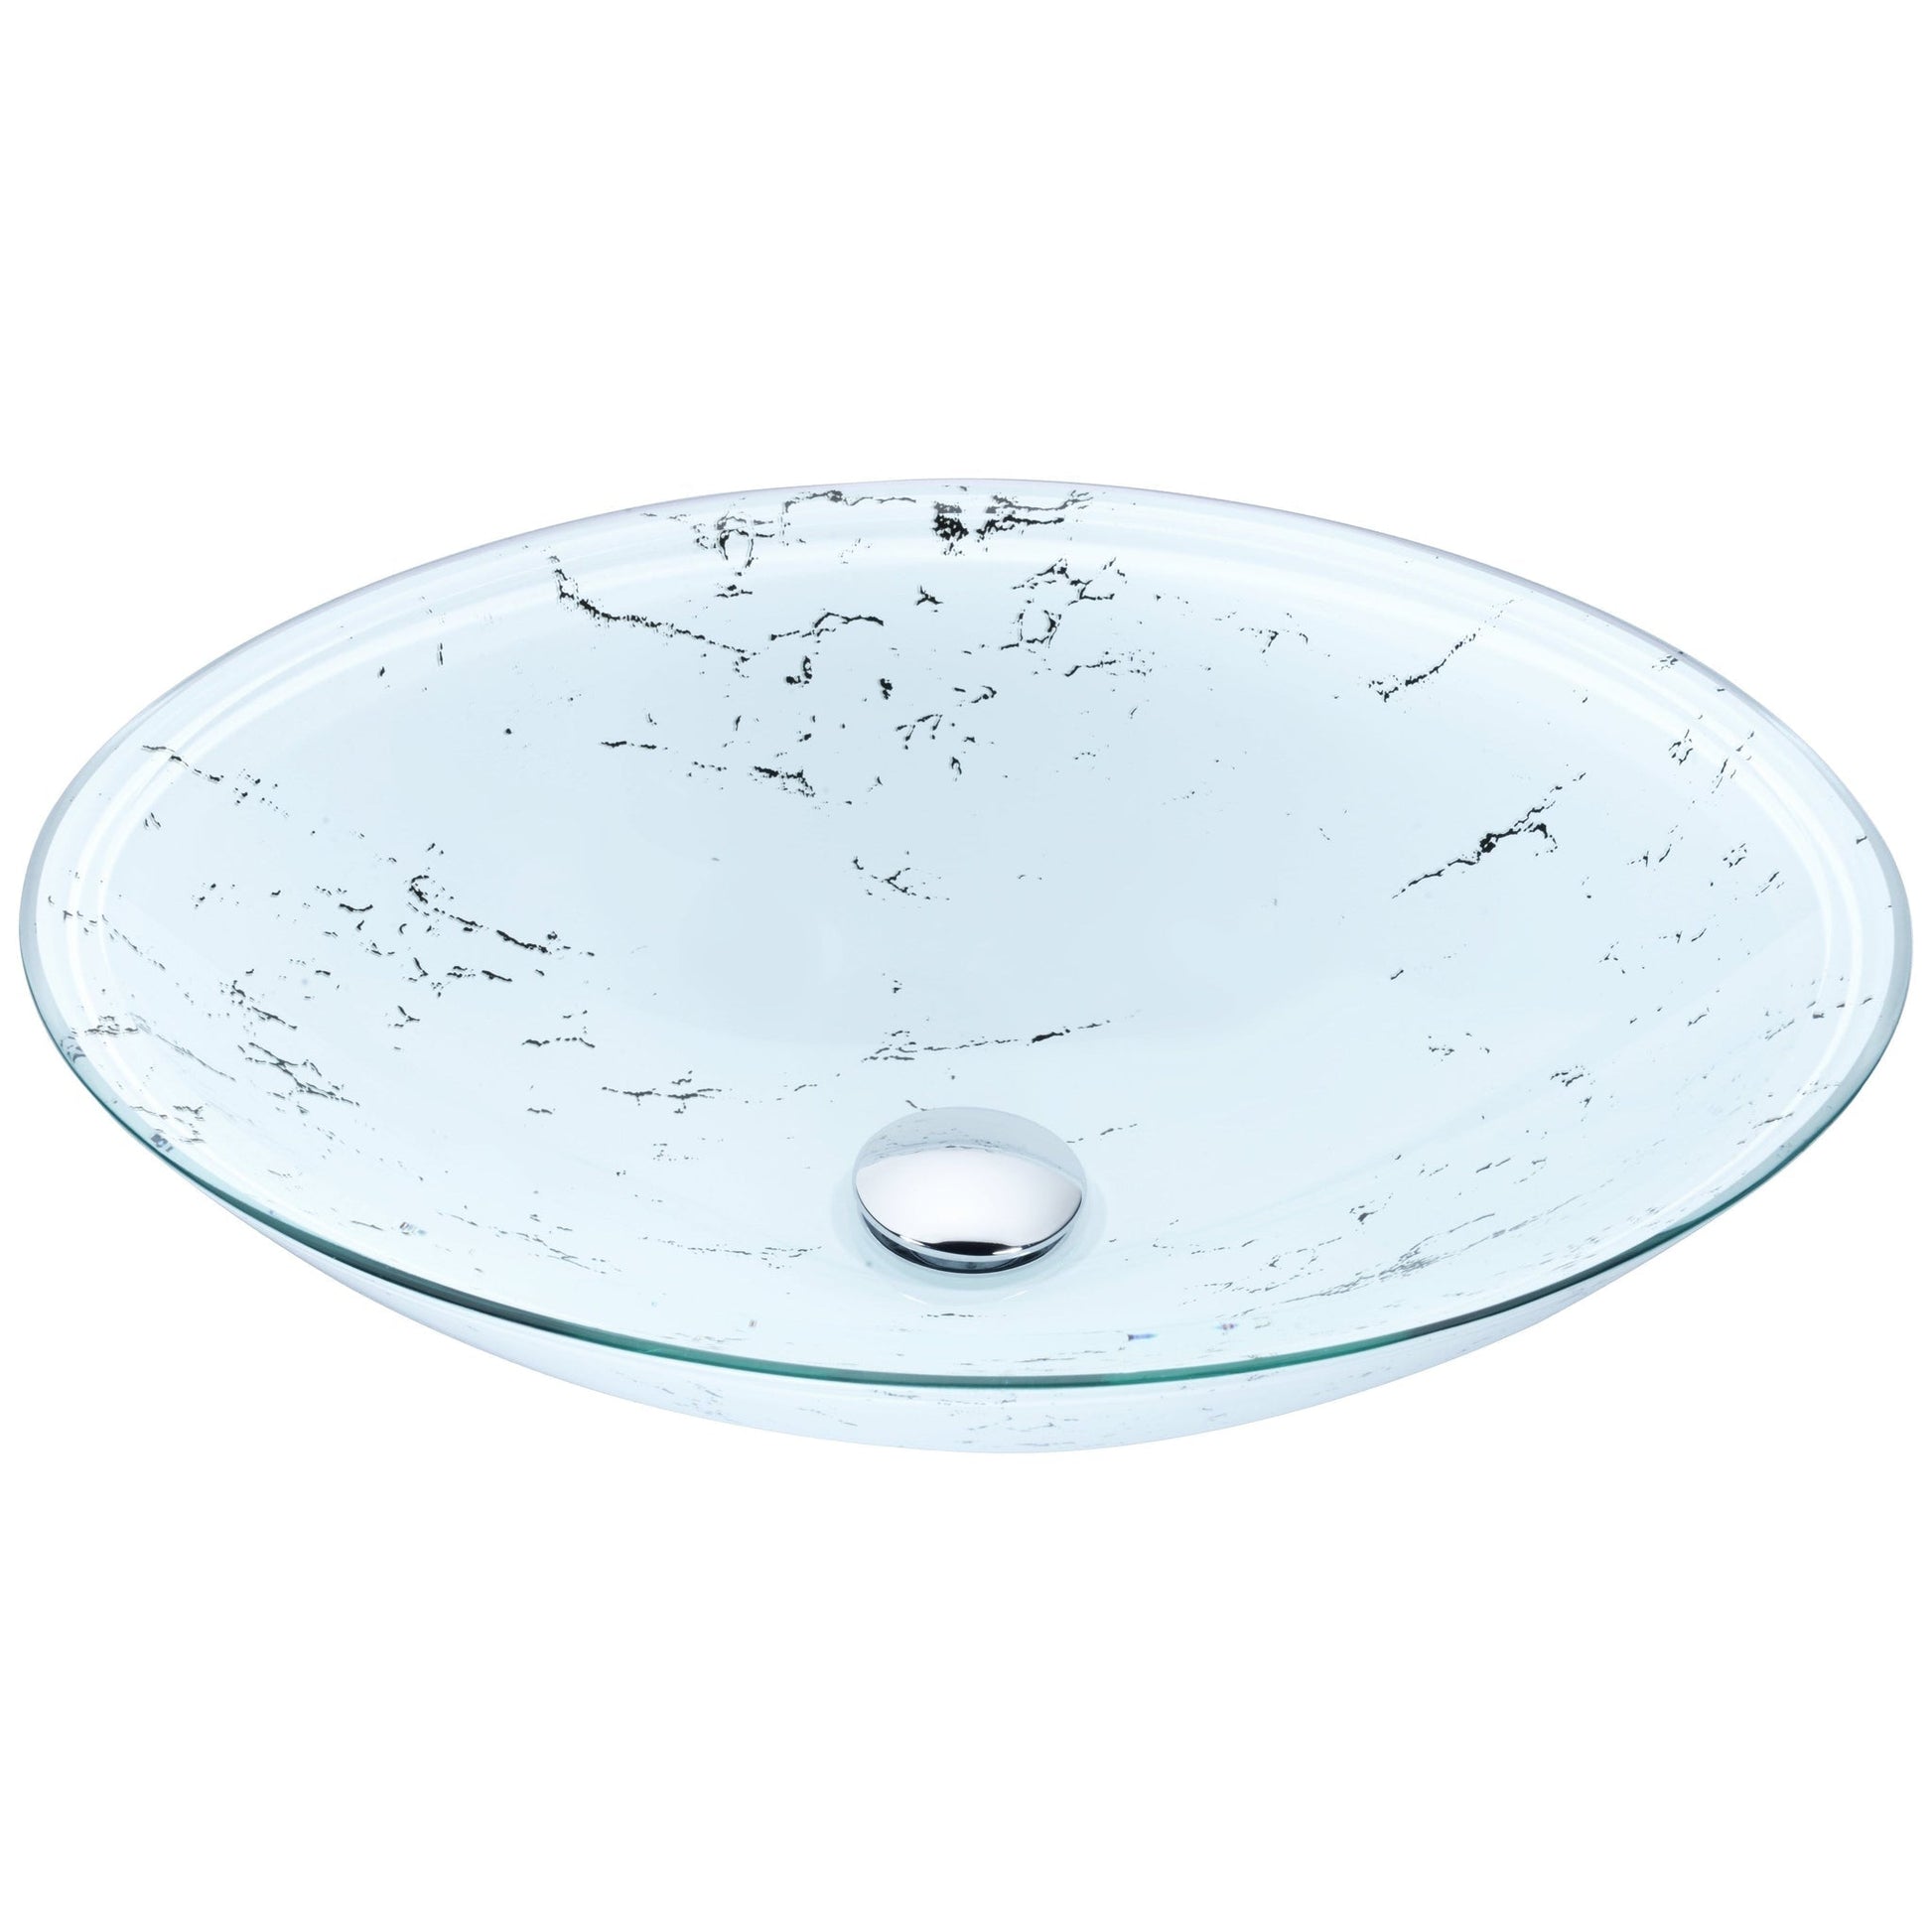 ANZZI Marbela Series 20" x 16" Oval Shaped Marbled White Deco-Glass Vessel Sink With Polished Chrome Pop-Up Drain